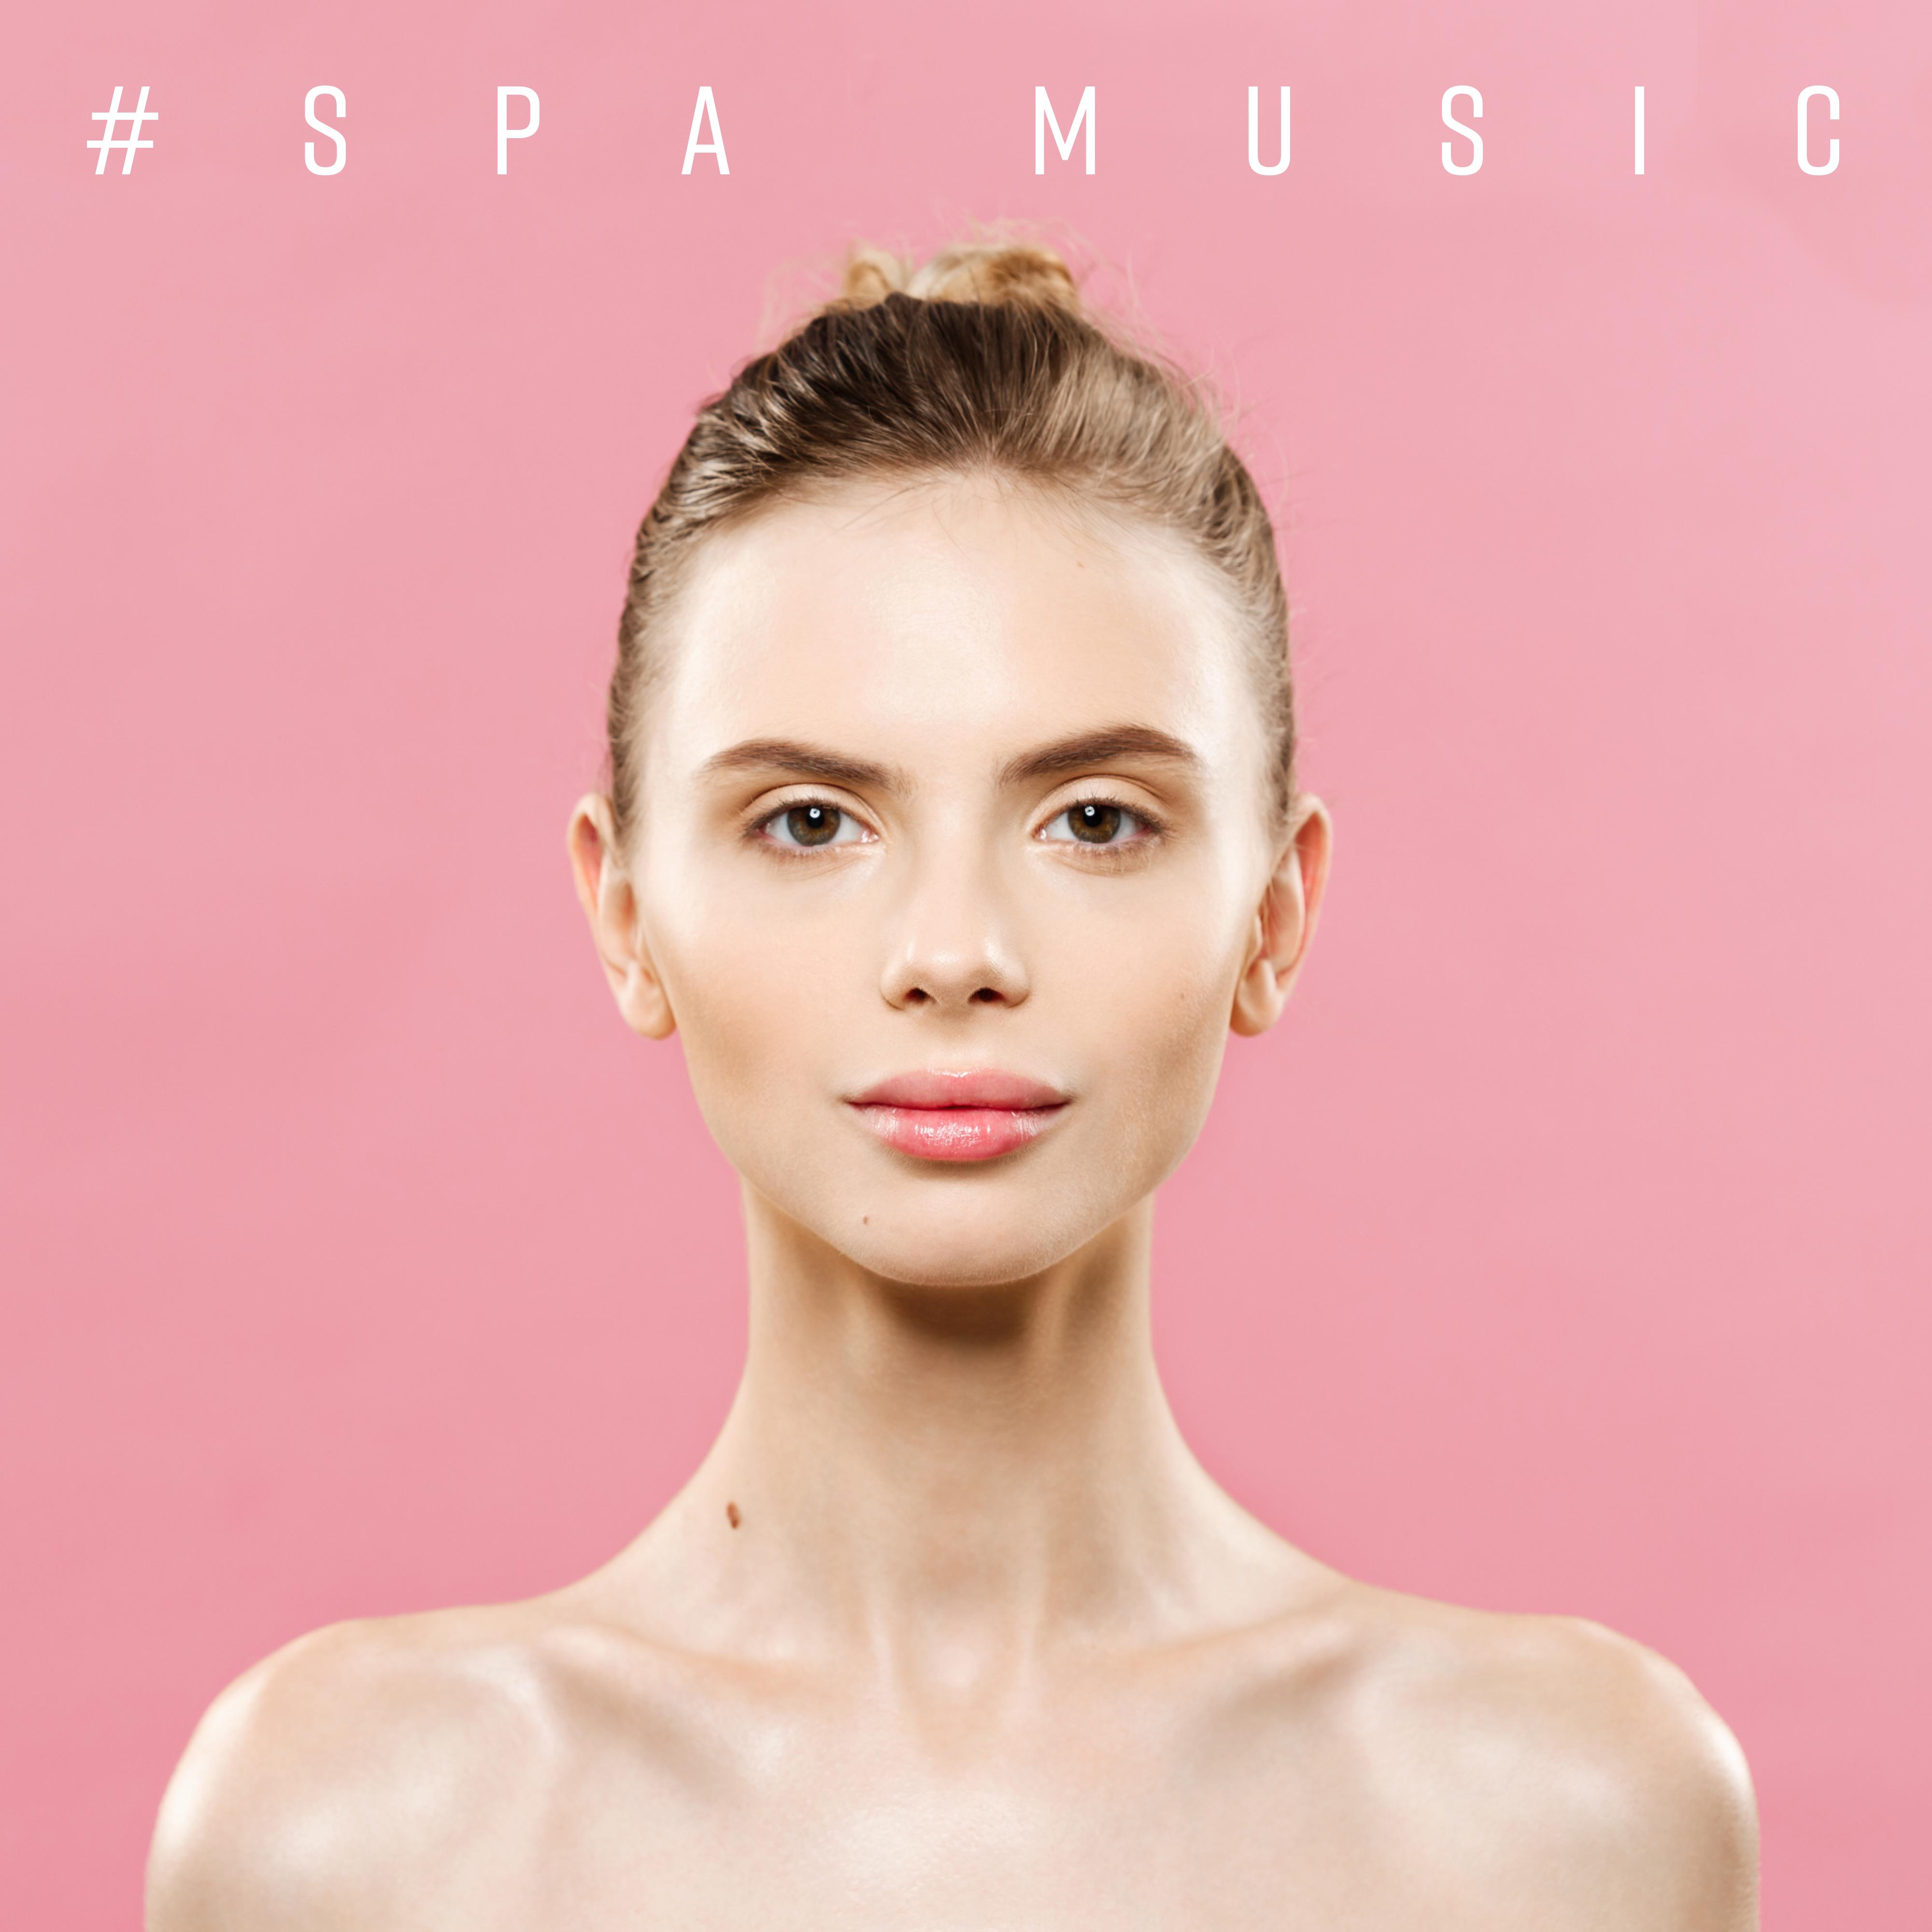 #Spa Music – Calming Nature Sounds for Relaxation